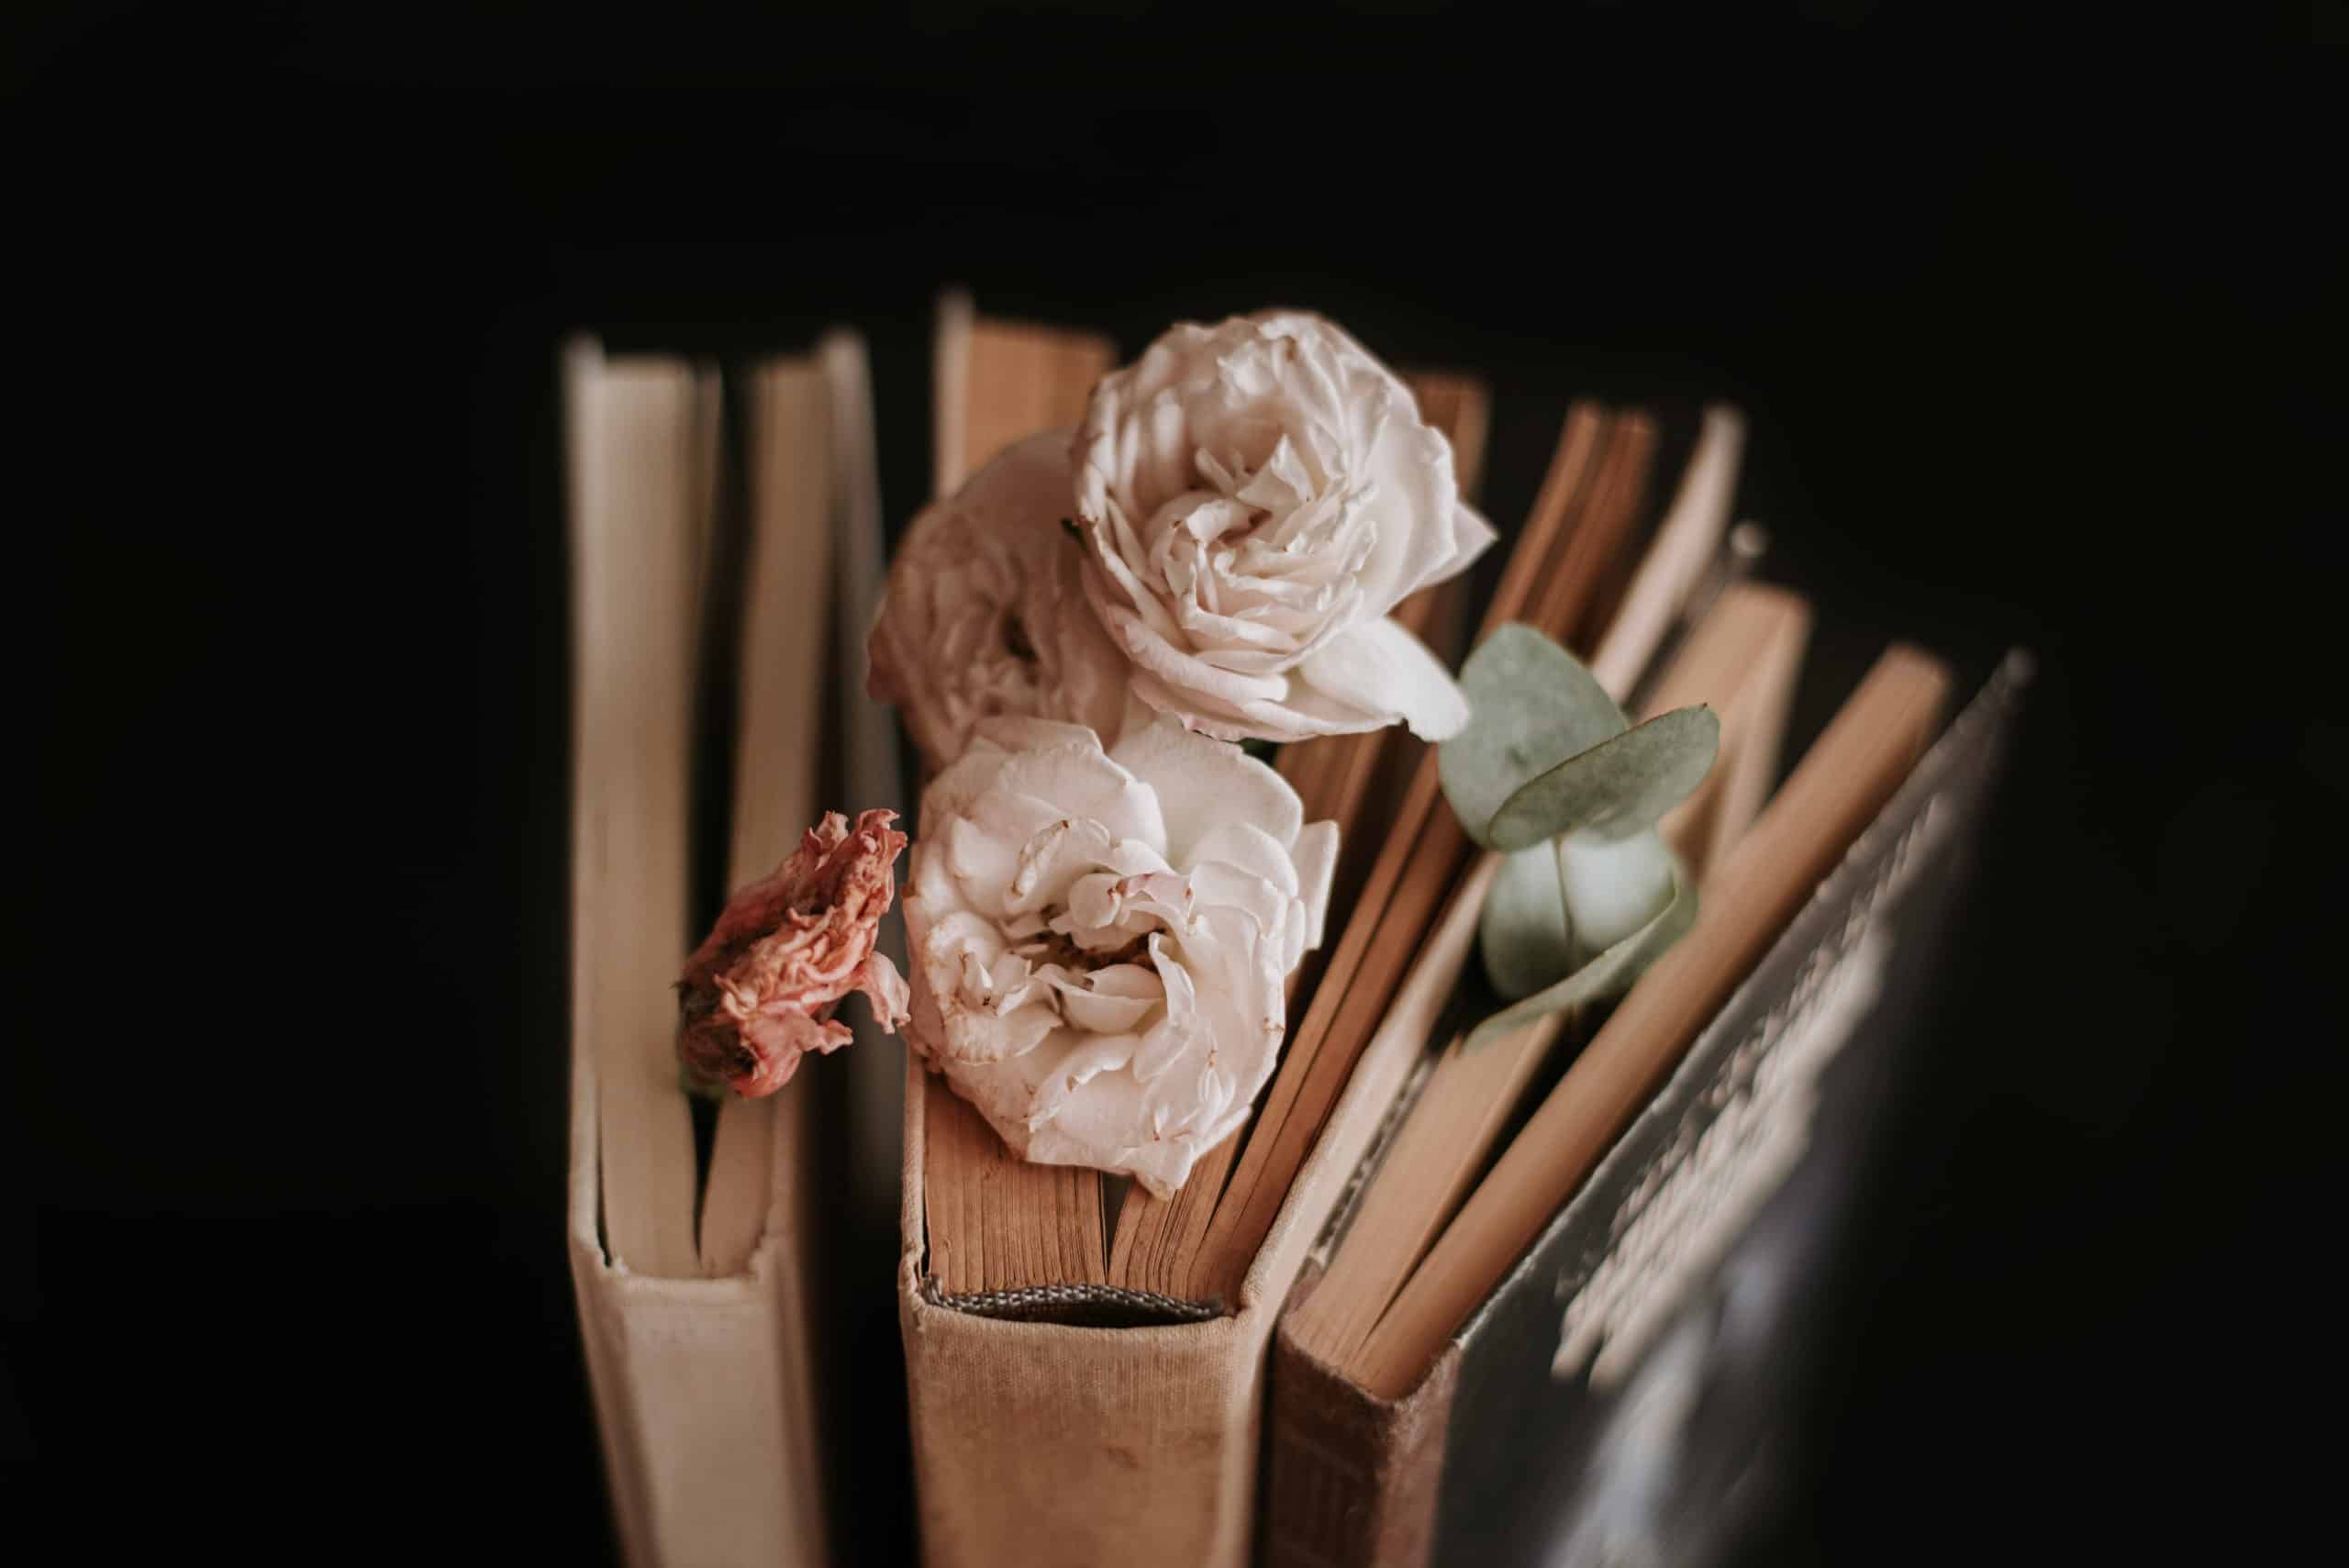 Three old books, dried flowers inserted in between them